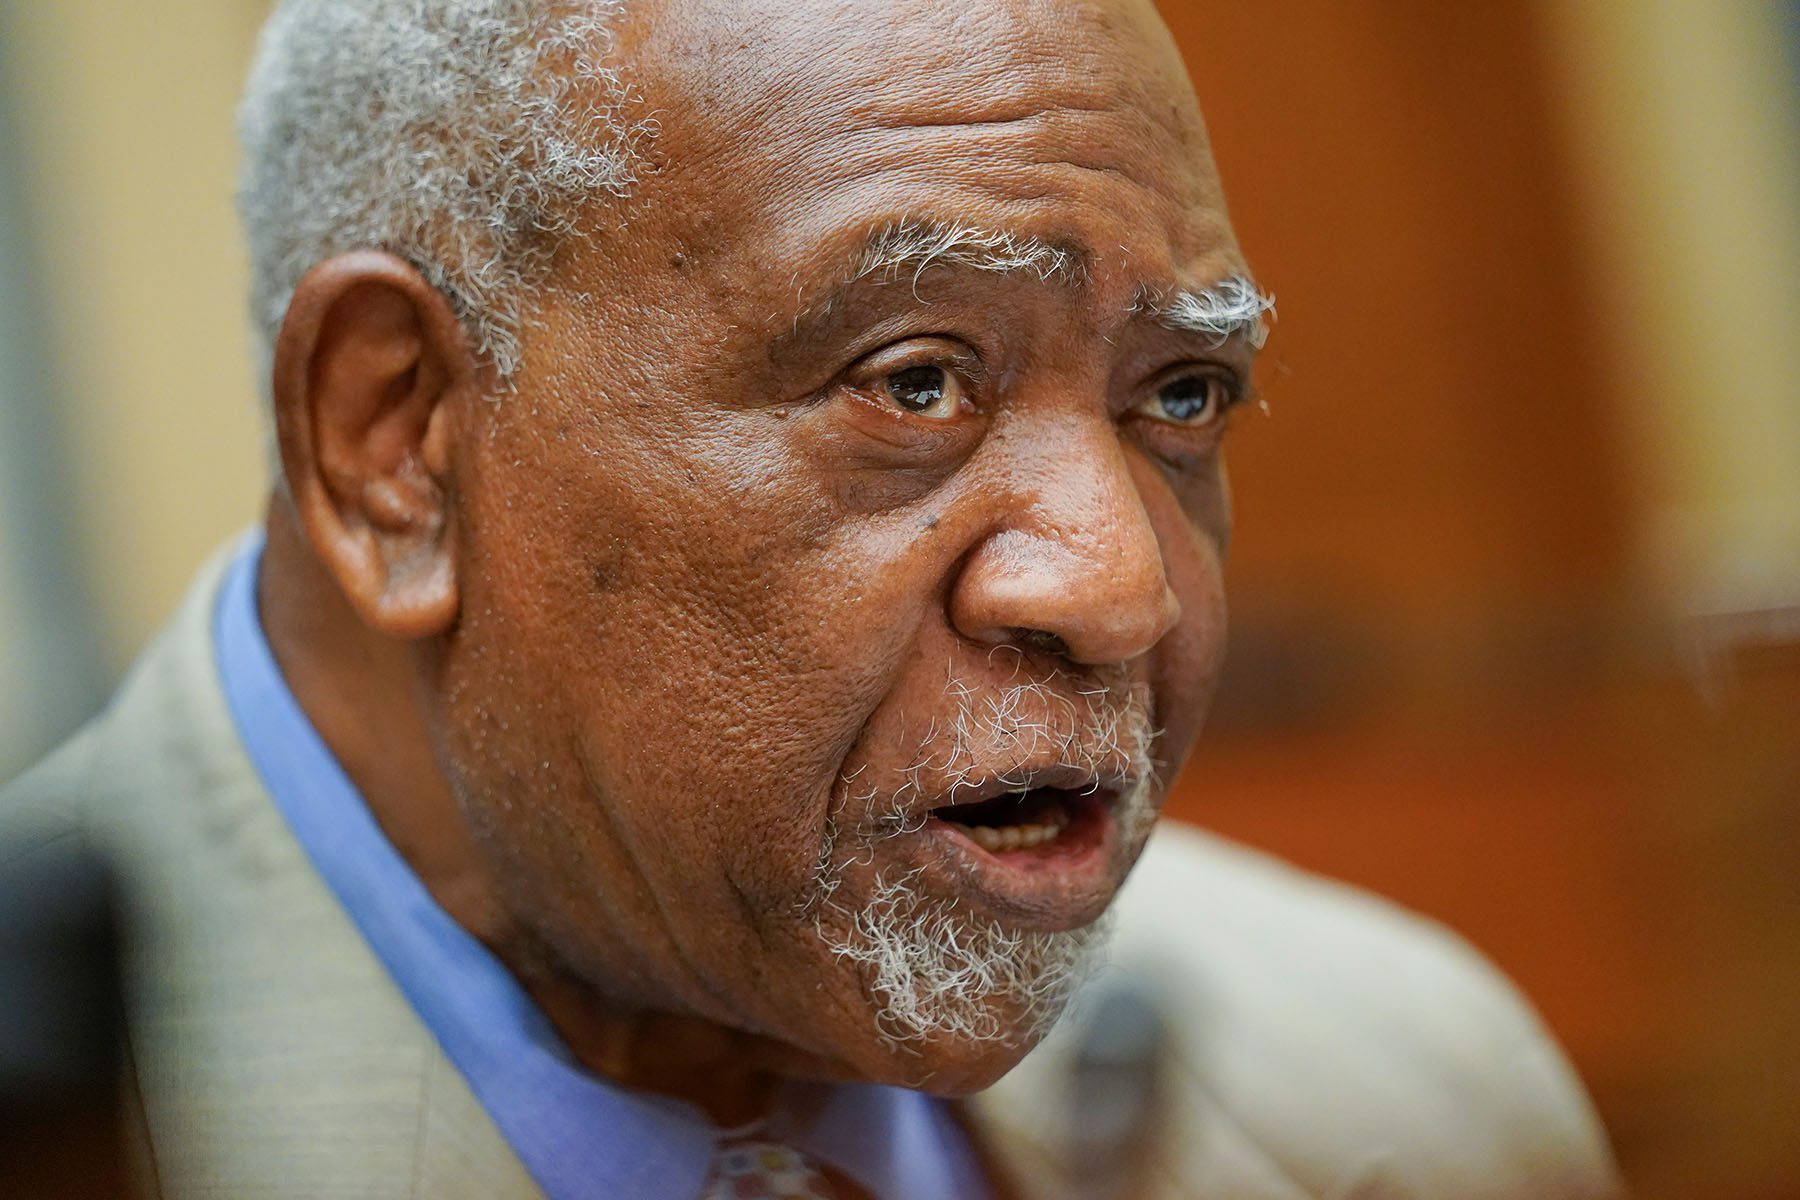 Rep. Danny Davis speaks during a House Committee on Oversight and Reform hearing.